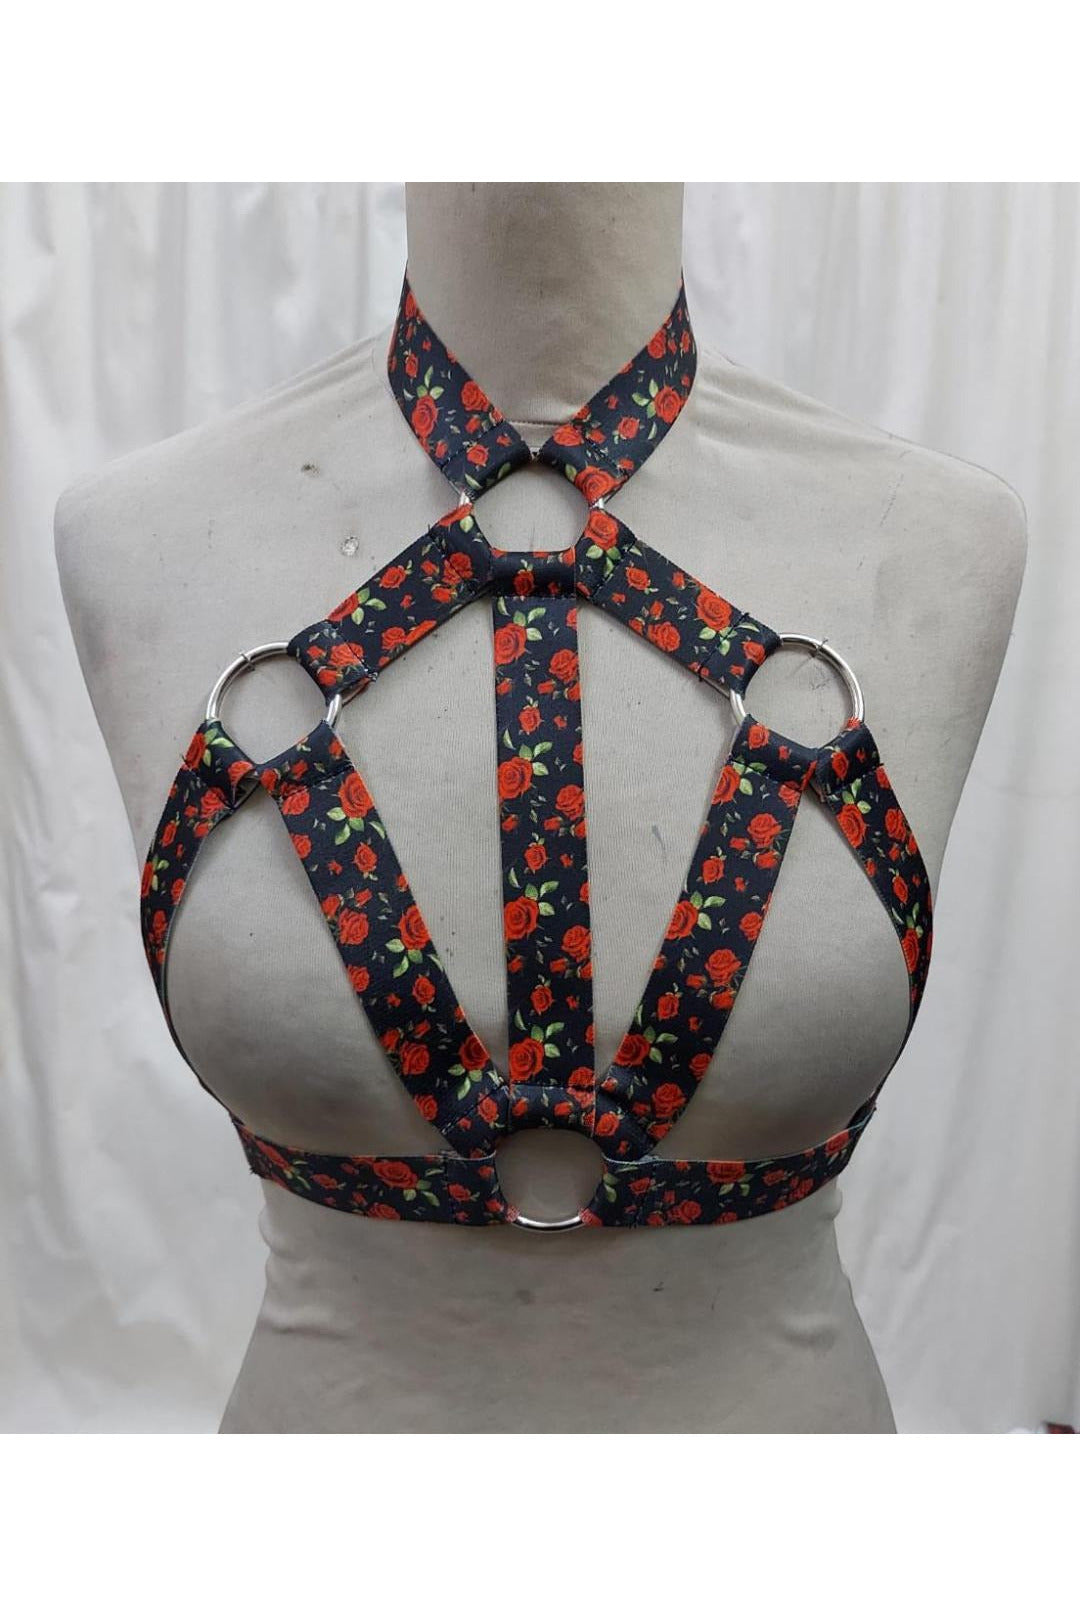 Red Roses Stretchy Body Harness w/Silver Hardware-Daisy Corsets